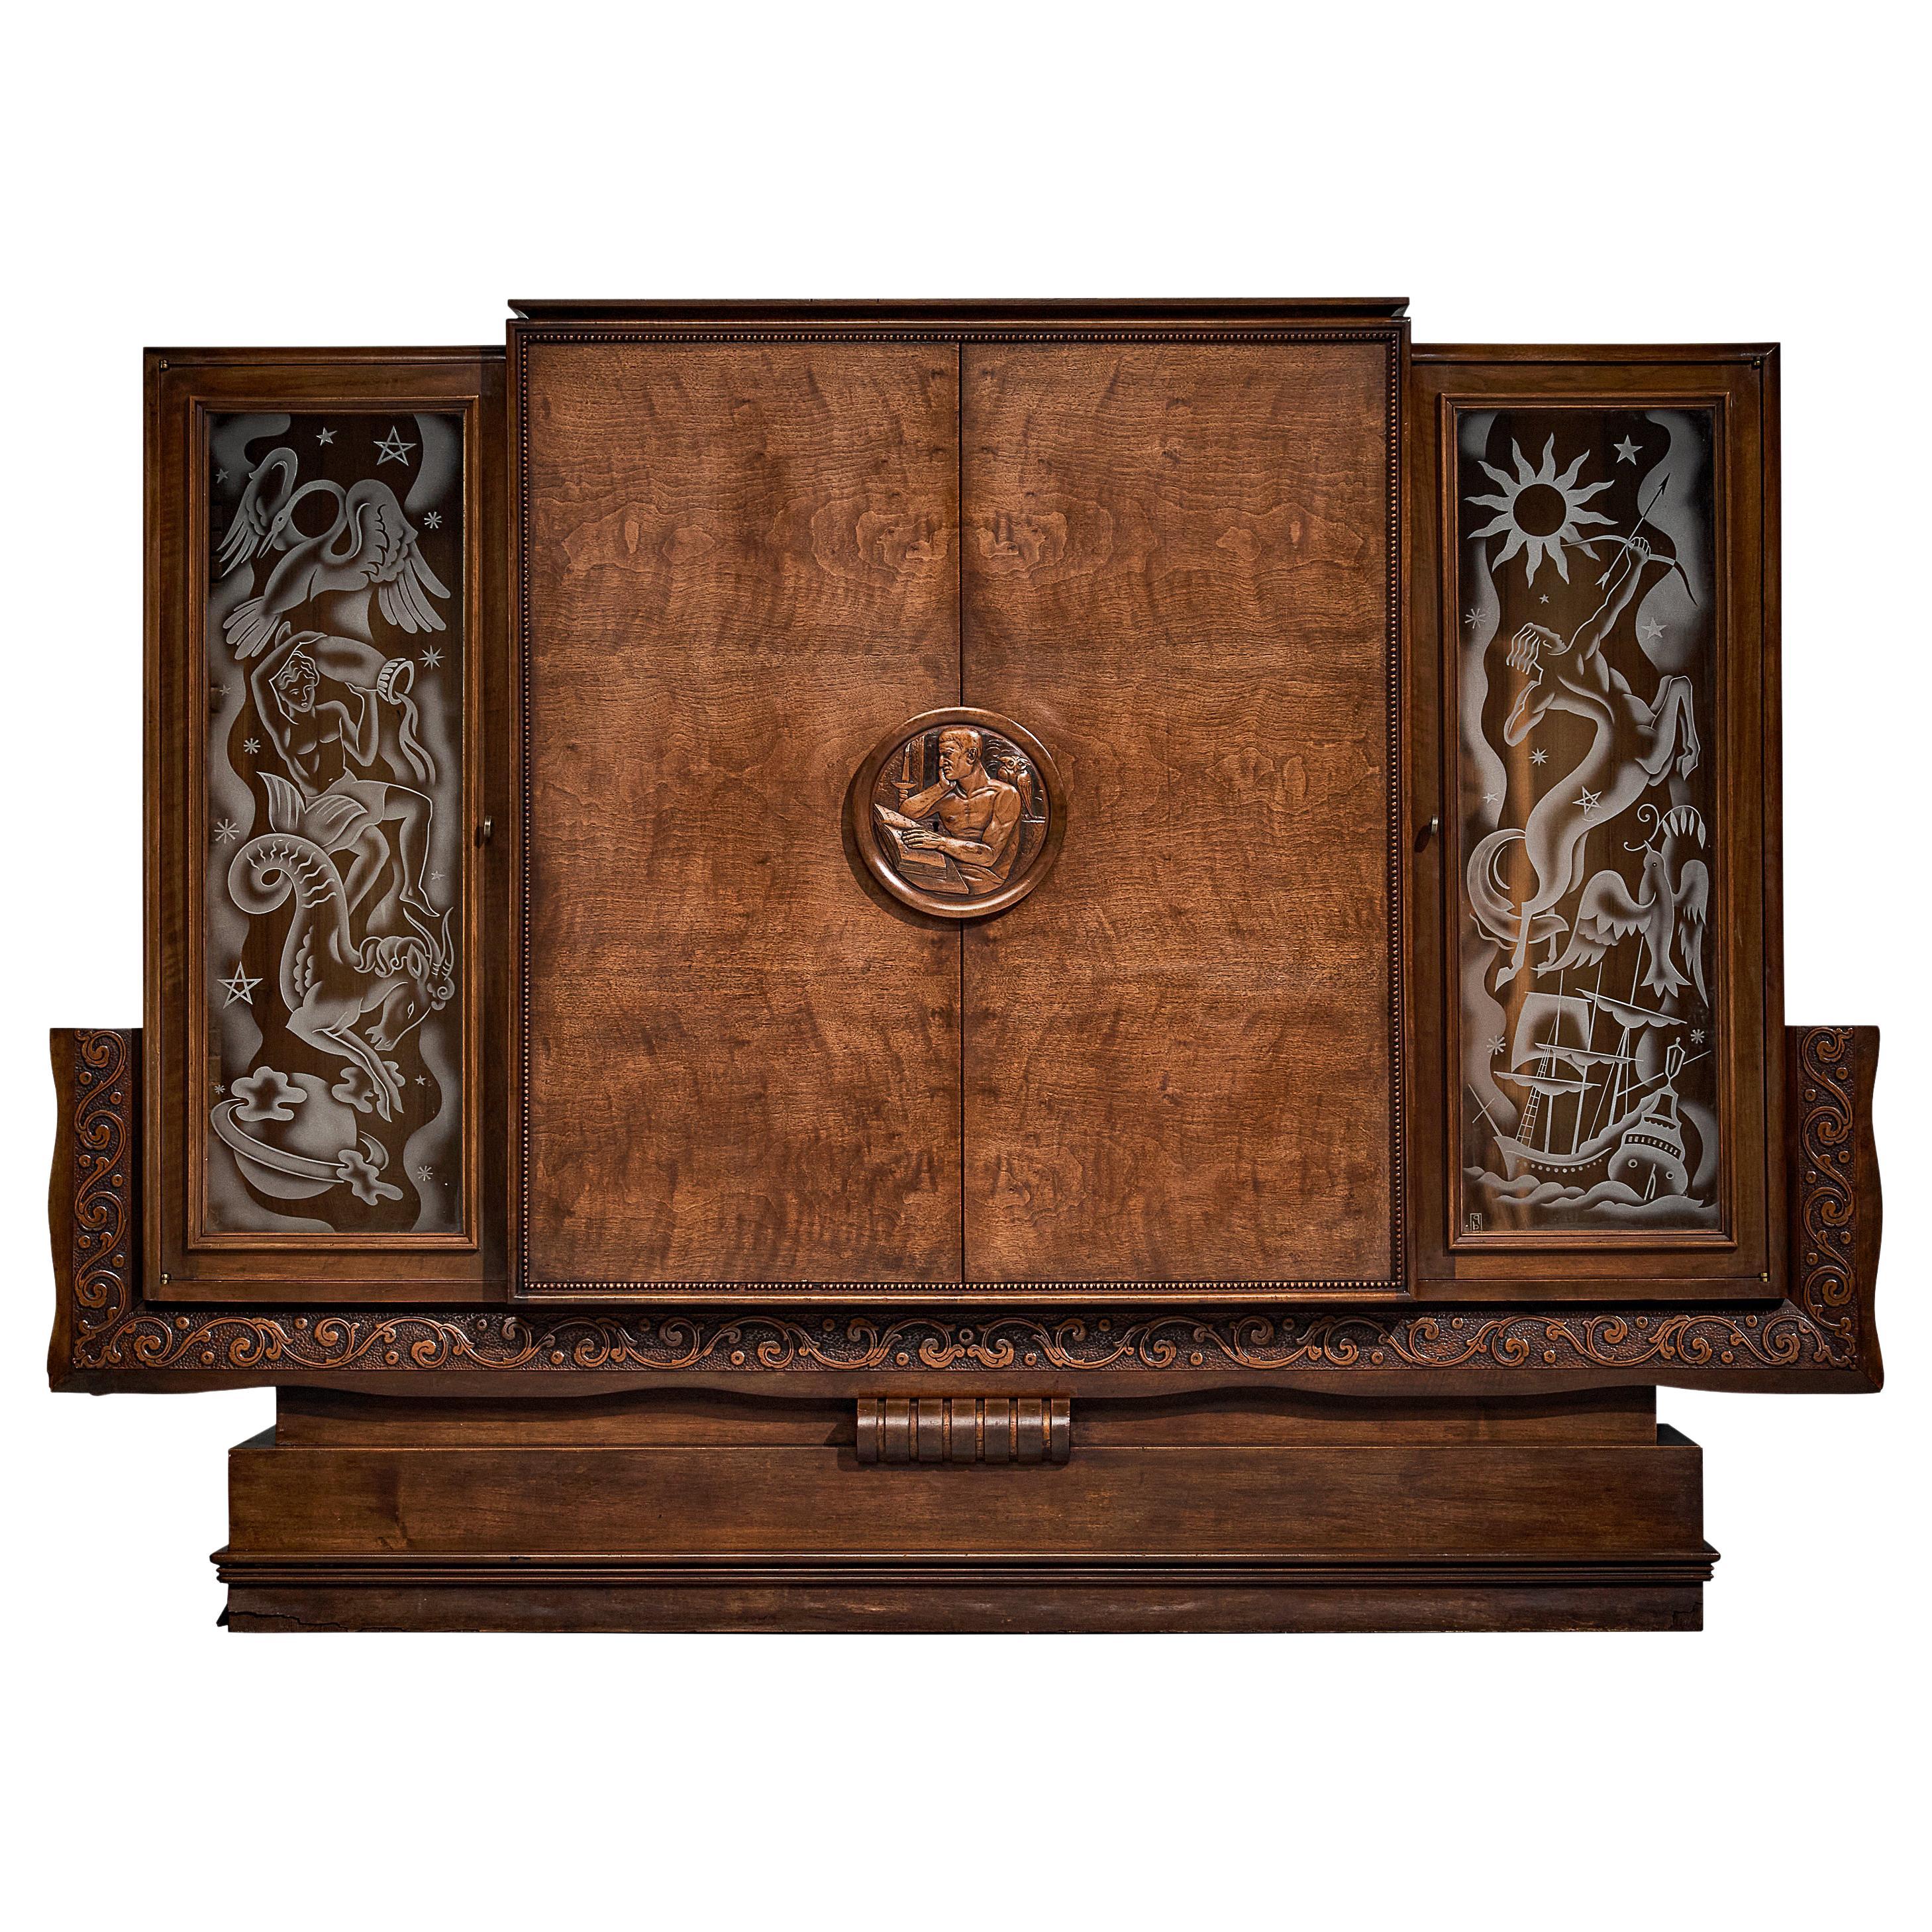 1930s Art Deco Armoire with Decorative Illustrations by Artisan Maker